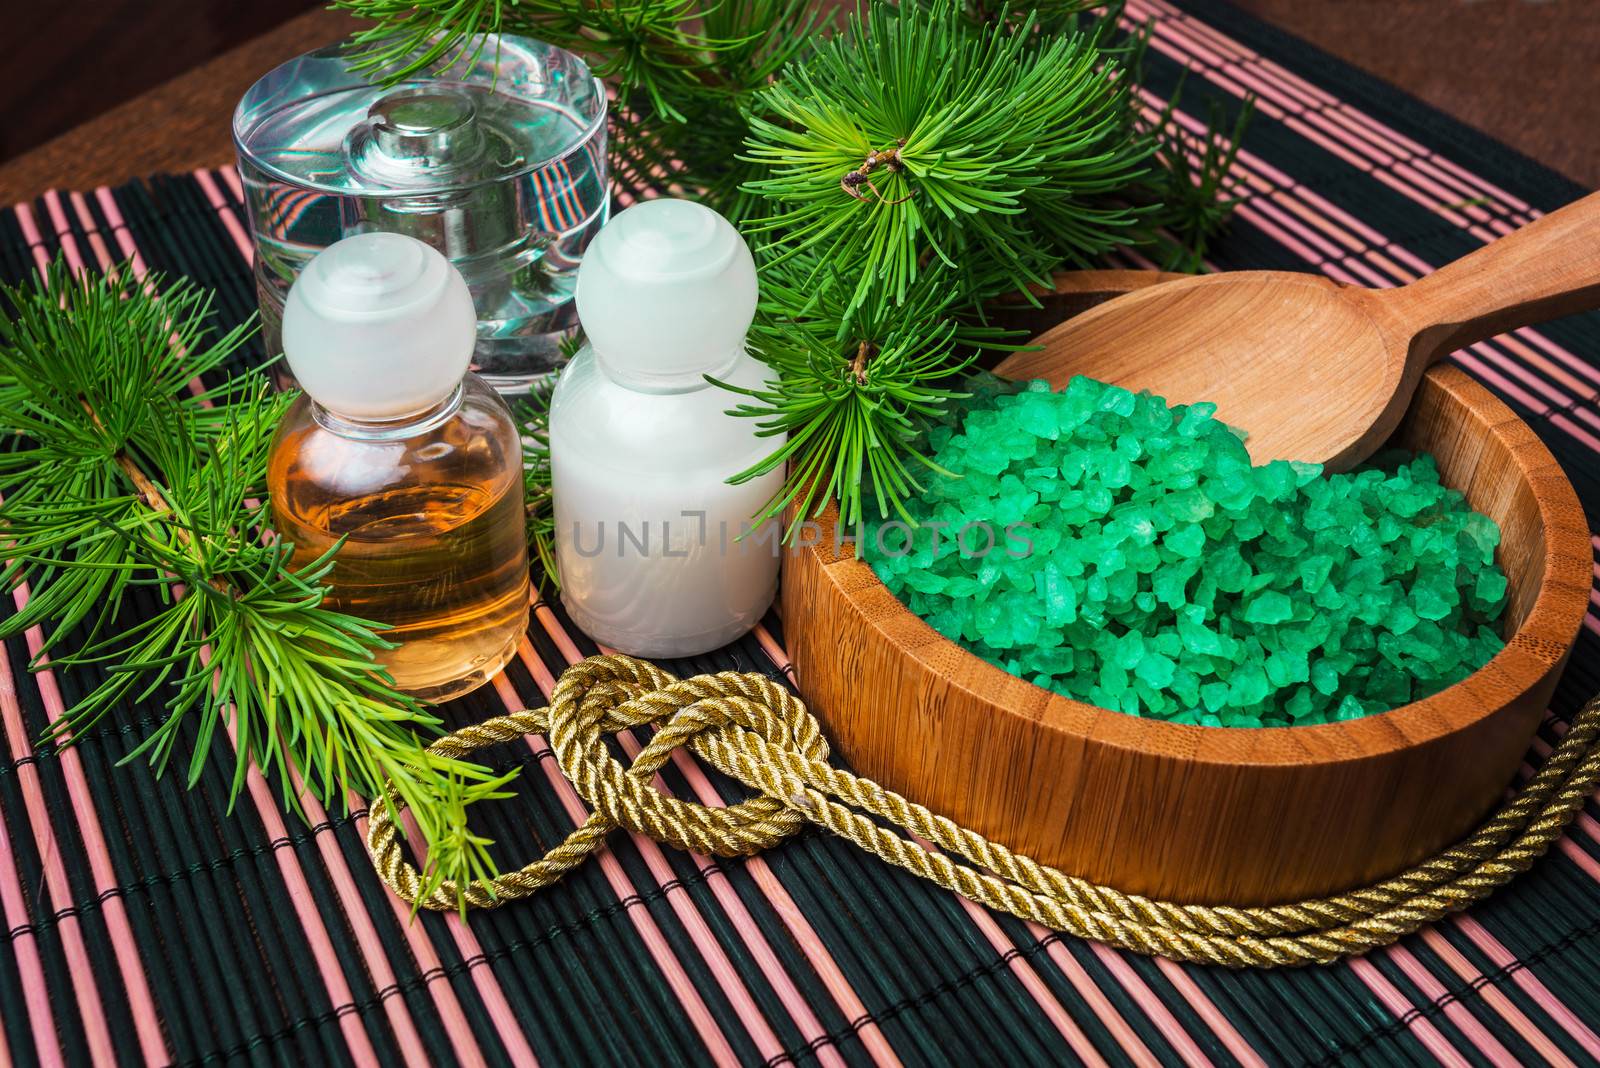 spa treatments and personal hygiene products